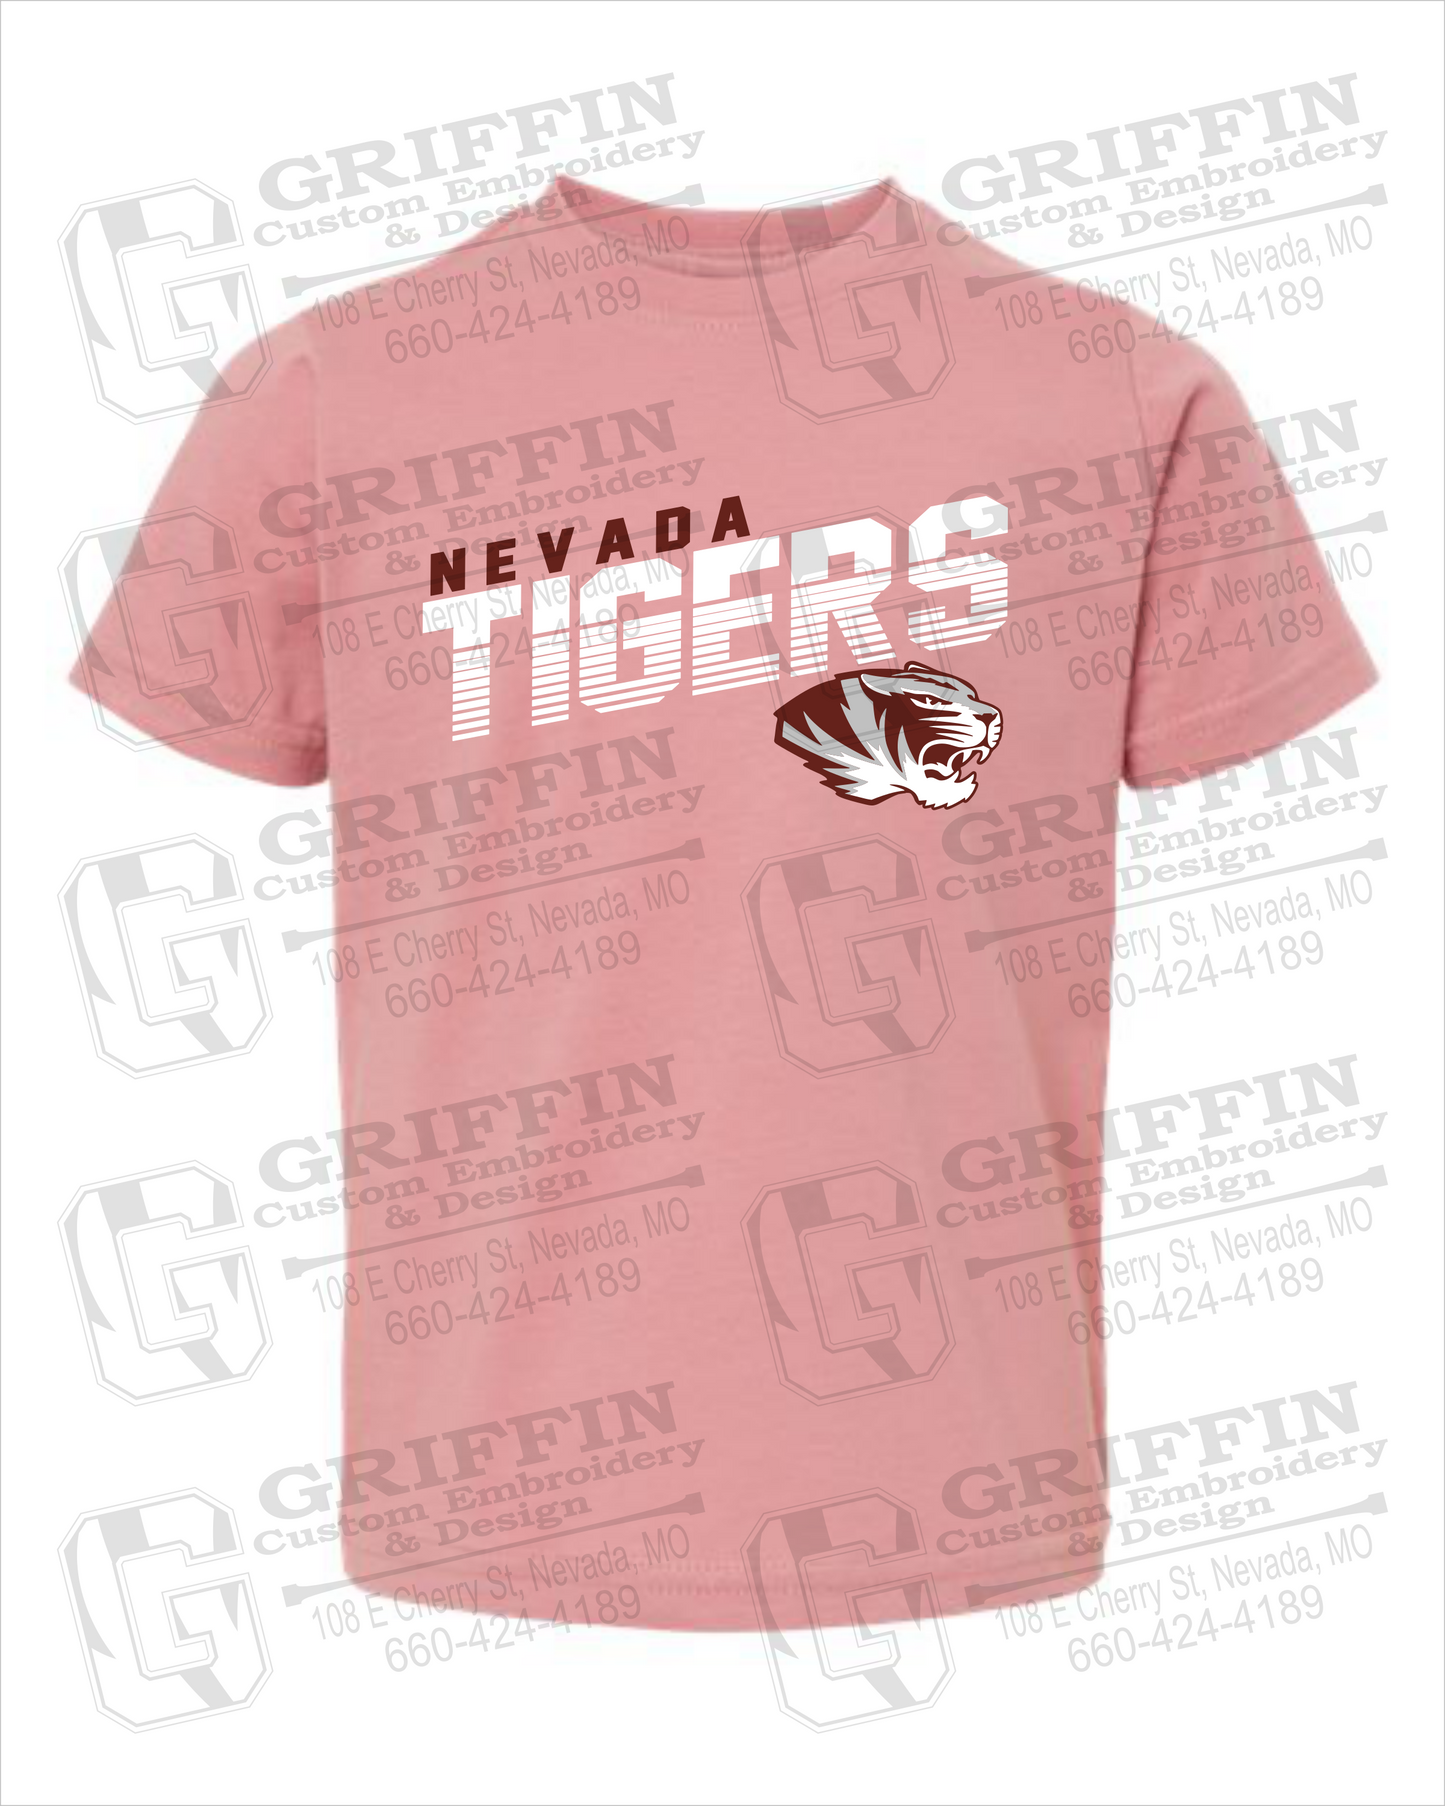 Nevada Tigers 19-A Toddler/Infant T-Shirt